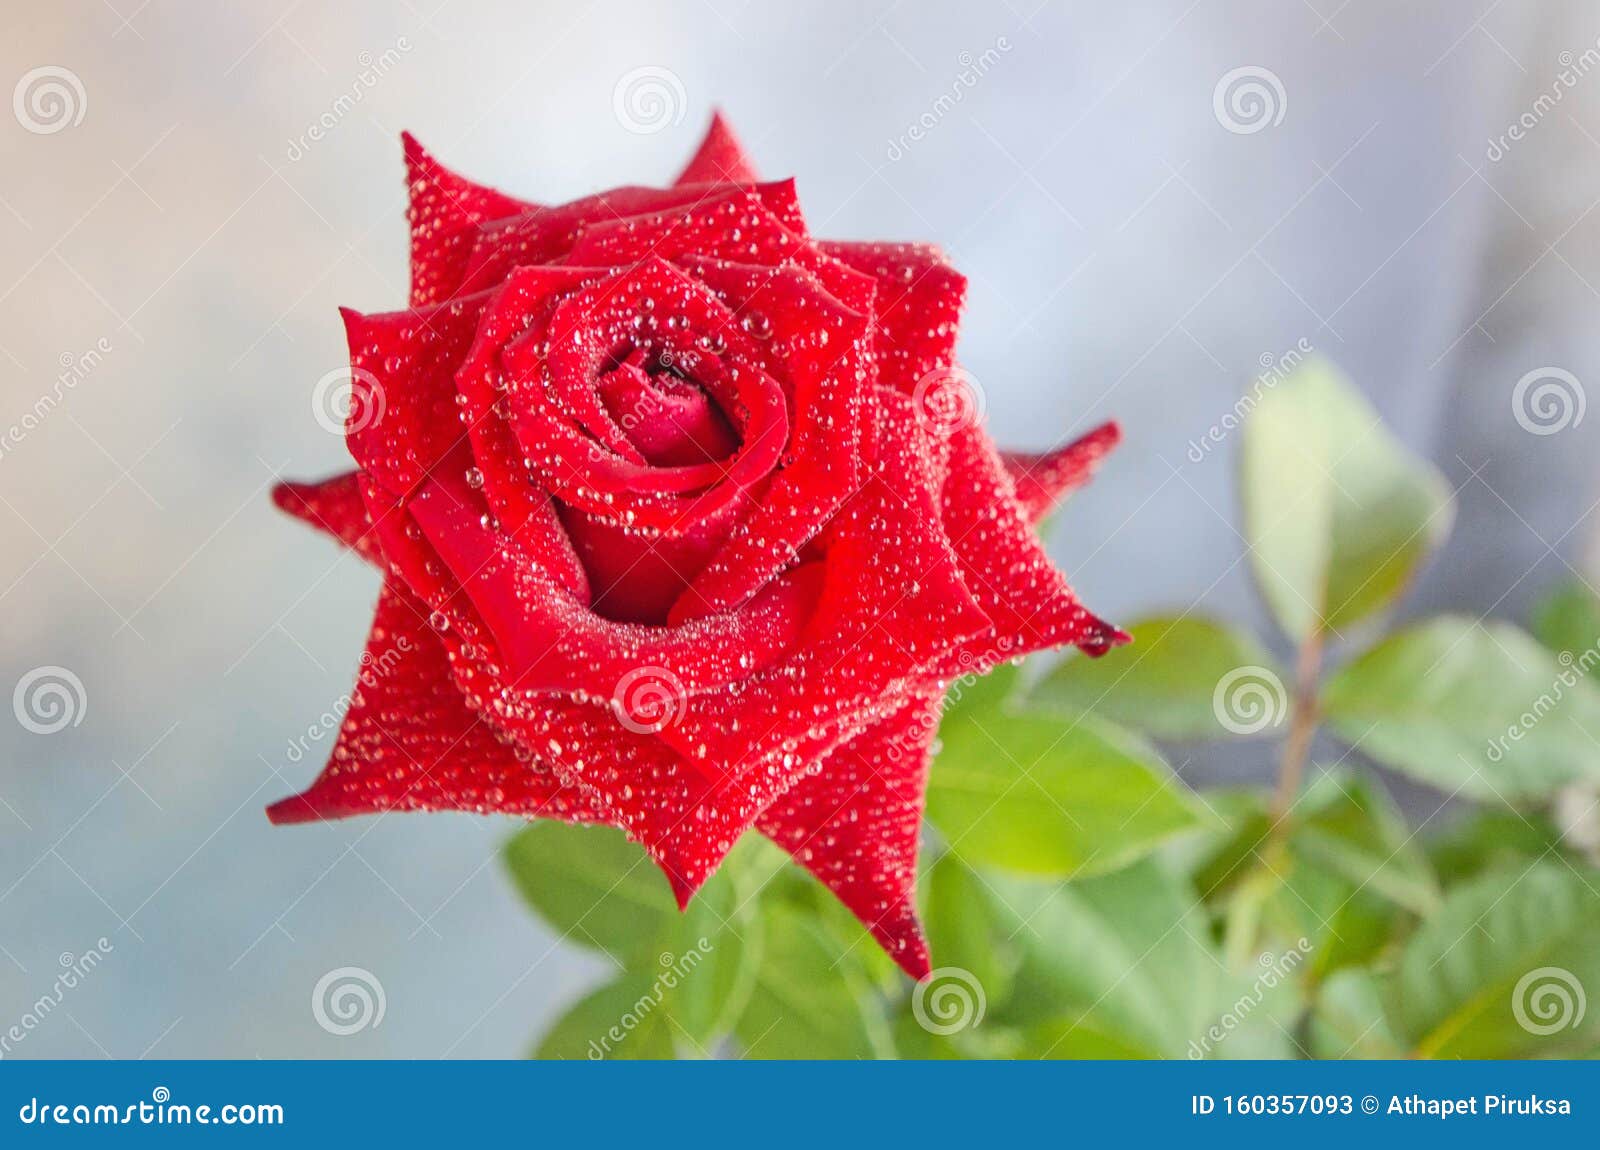 Beautiful Red Rose with Dew Drops Stock Image - Image of ...